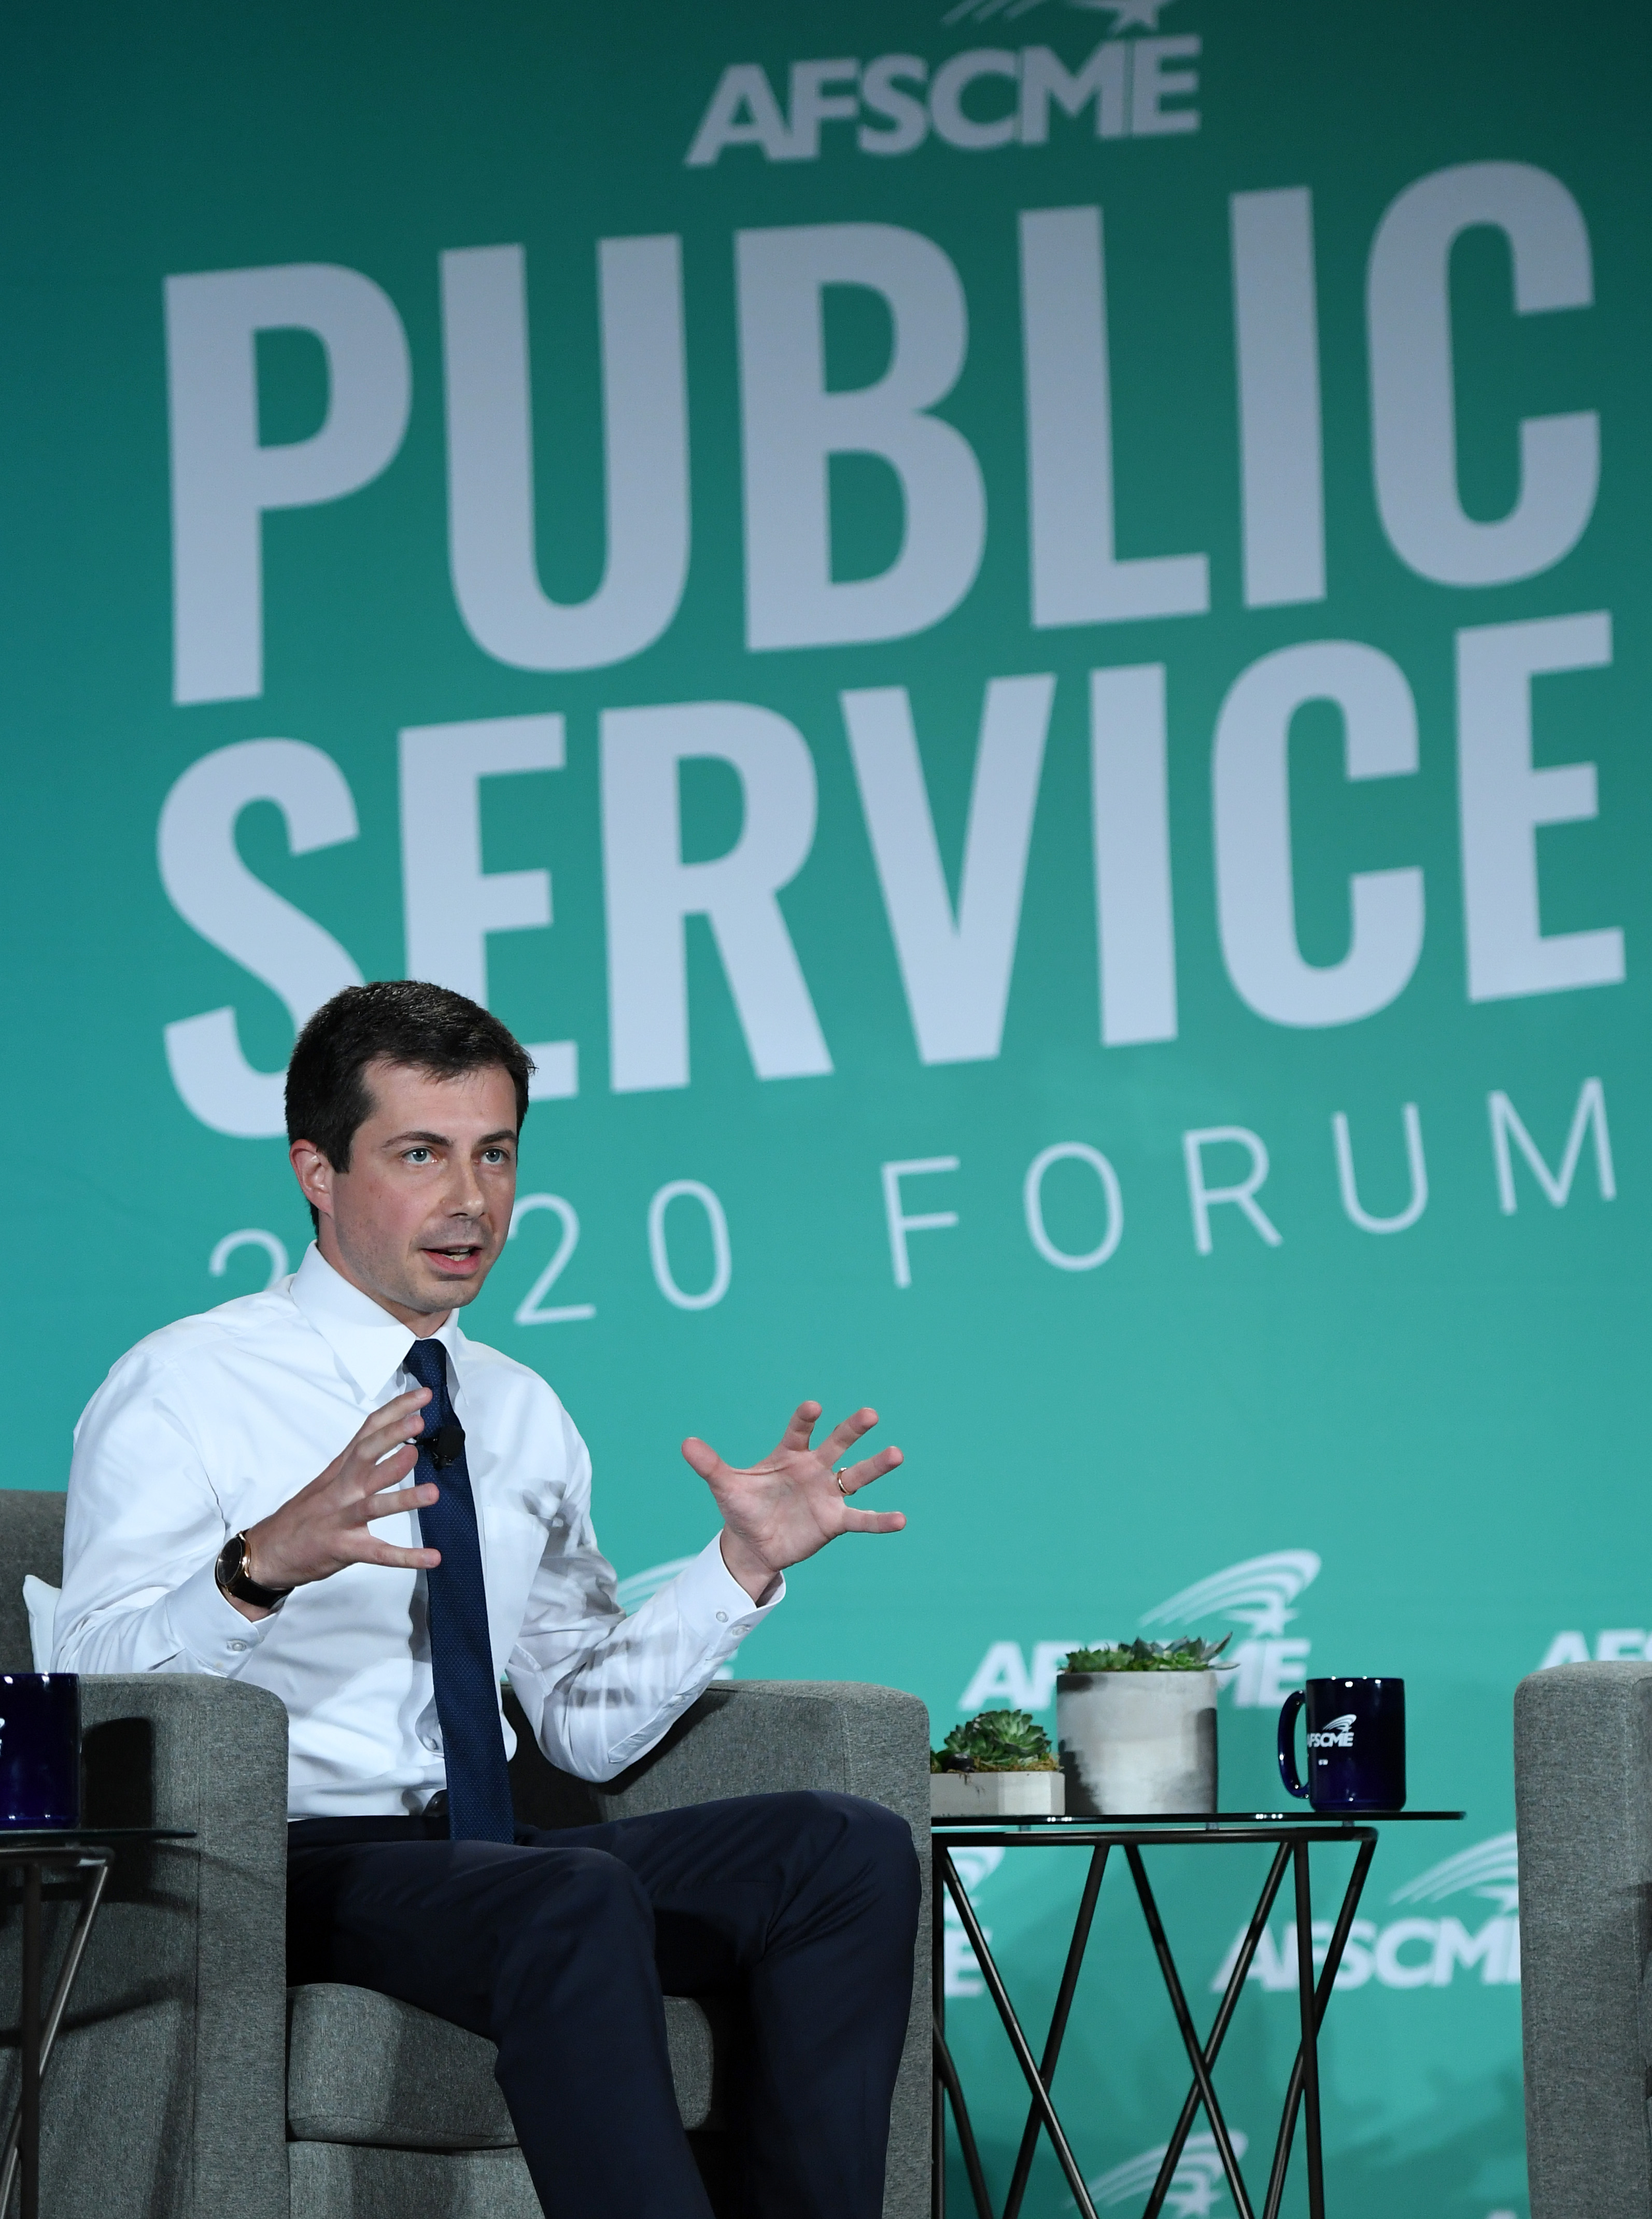 LAS VEGAS, NEVADA - AUGUST 03: Democratic presidential candidate and South Bend, Indiana Mayor Pete Buttigieg speaks during the 2020 Public Service Forum hosted by the American Federation of State, County and Municipal Employees (AFSCME) at UNLV on August 3, 2019 in Las Vegas, Nevada. Nineteen of the 24 candidates running for the Democratic party's 2020 presidential nomination are addressing union members in a state with one of the largest organized labor populations in the United States. (Photo by Ethan Miller/Getty Images)